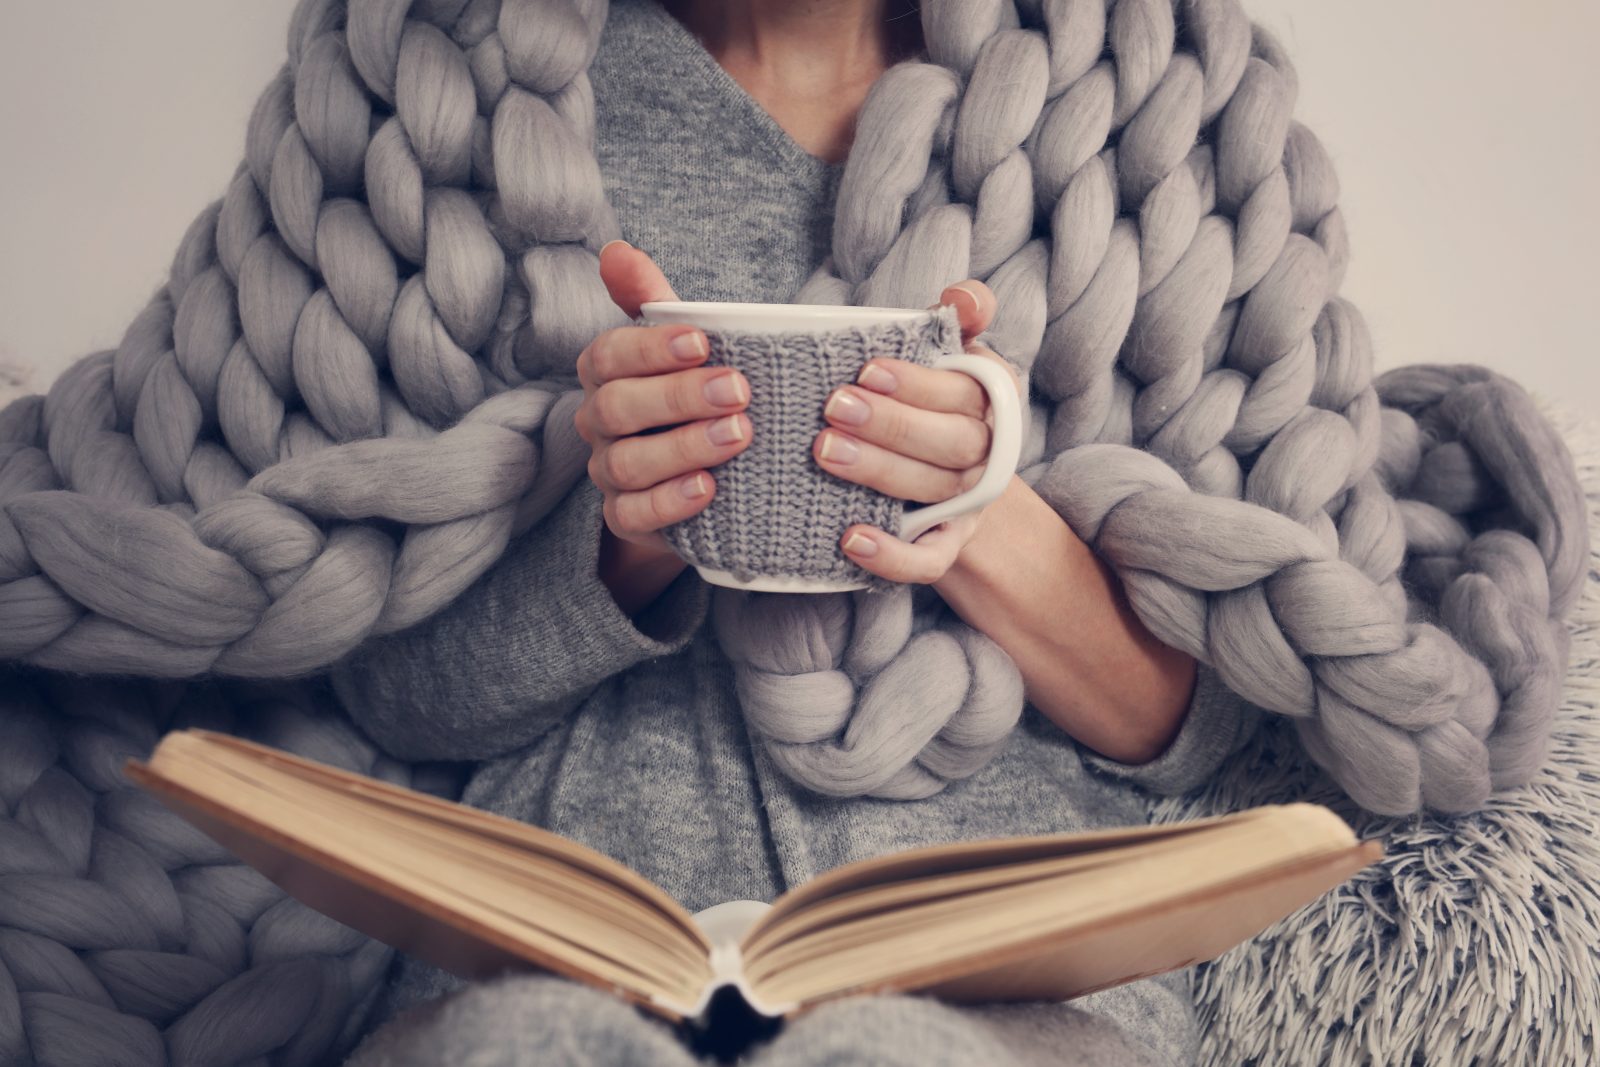 How to create extra coziness and warmth at home this winter